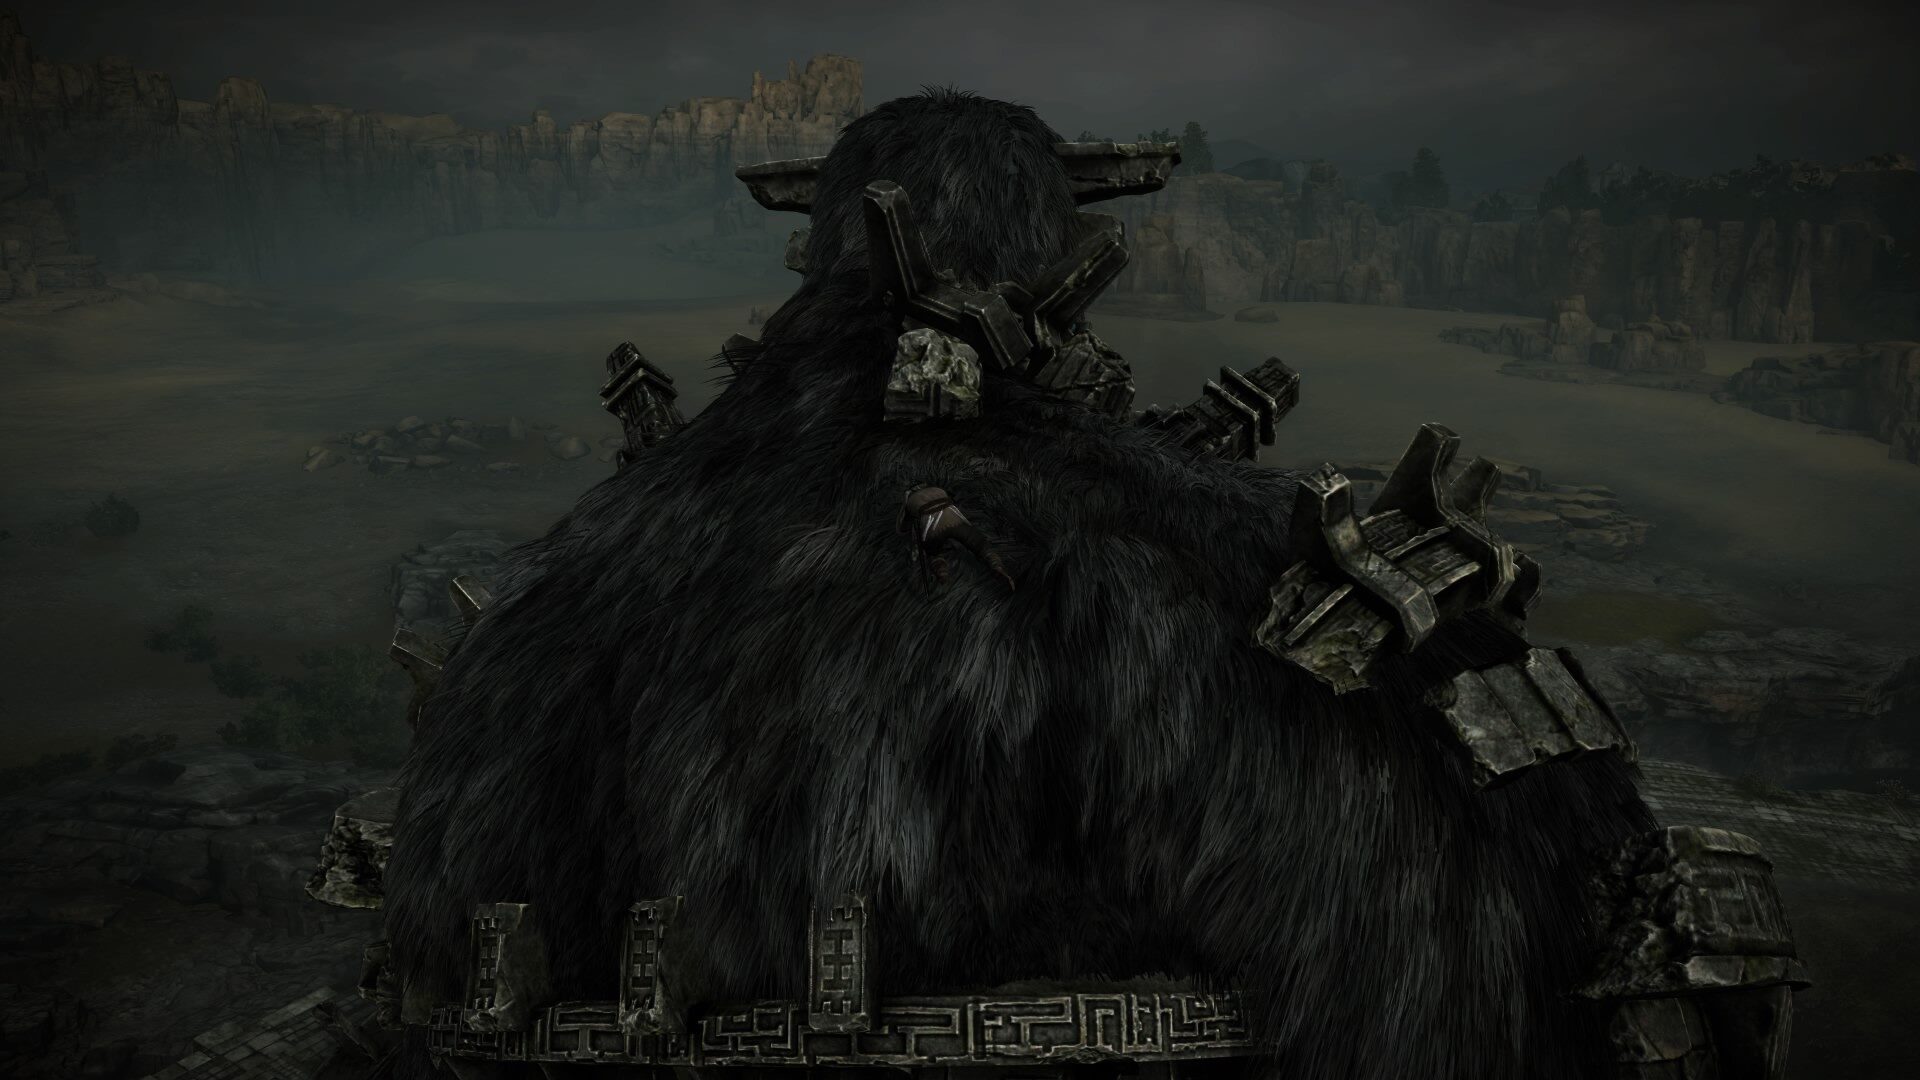 Buy Shadow of the Colossus for PS4